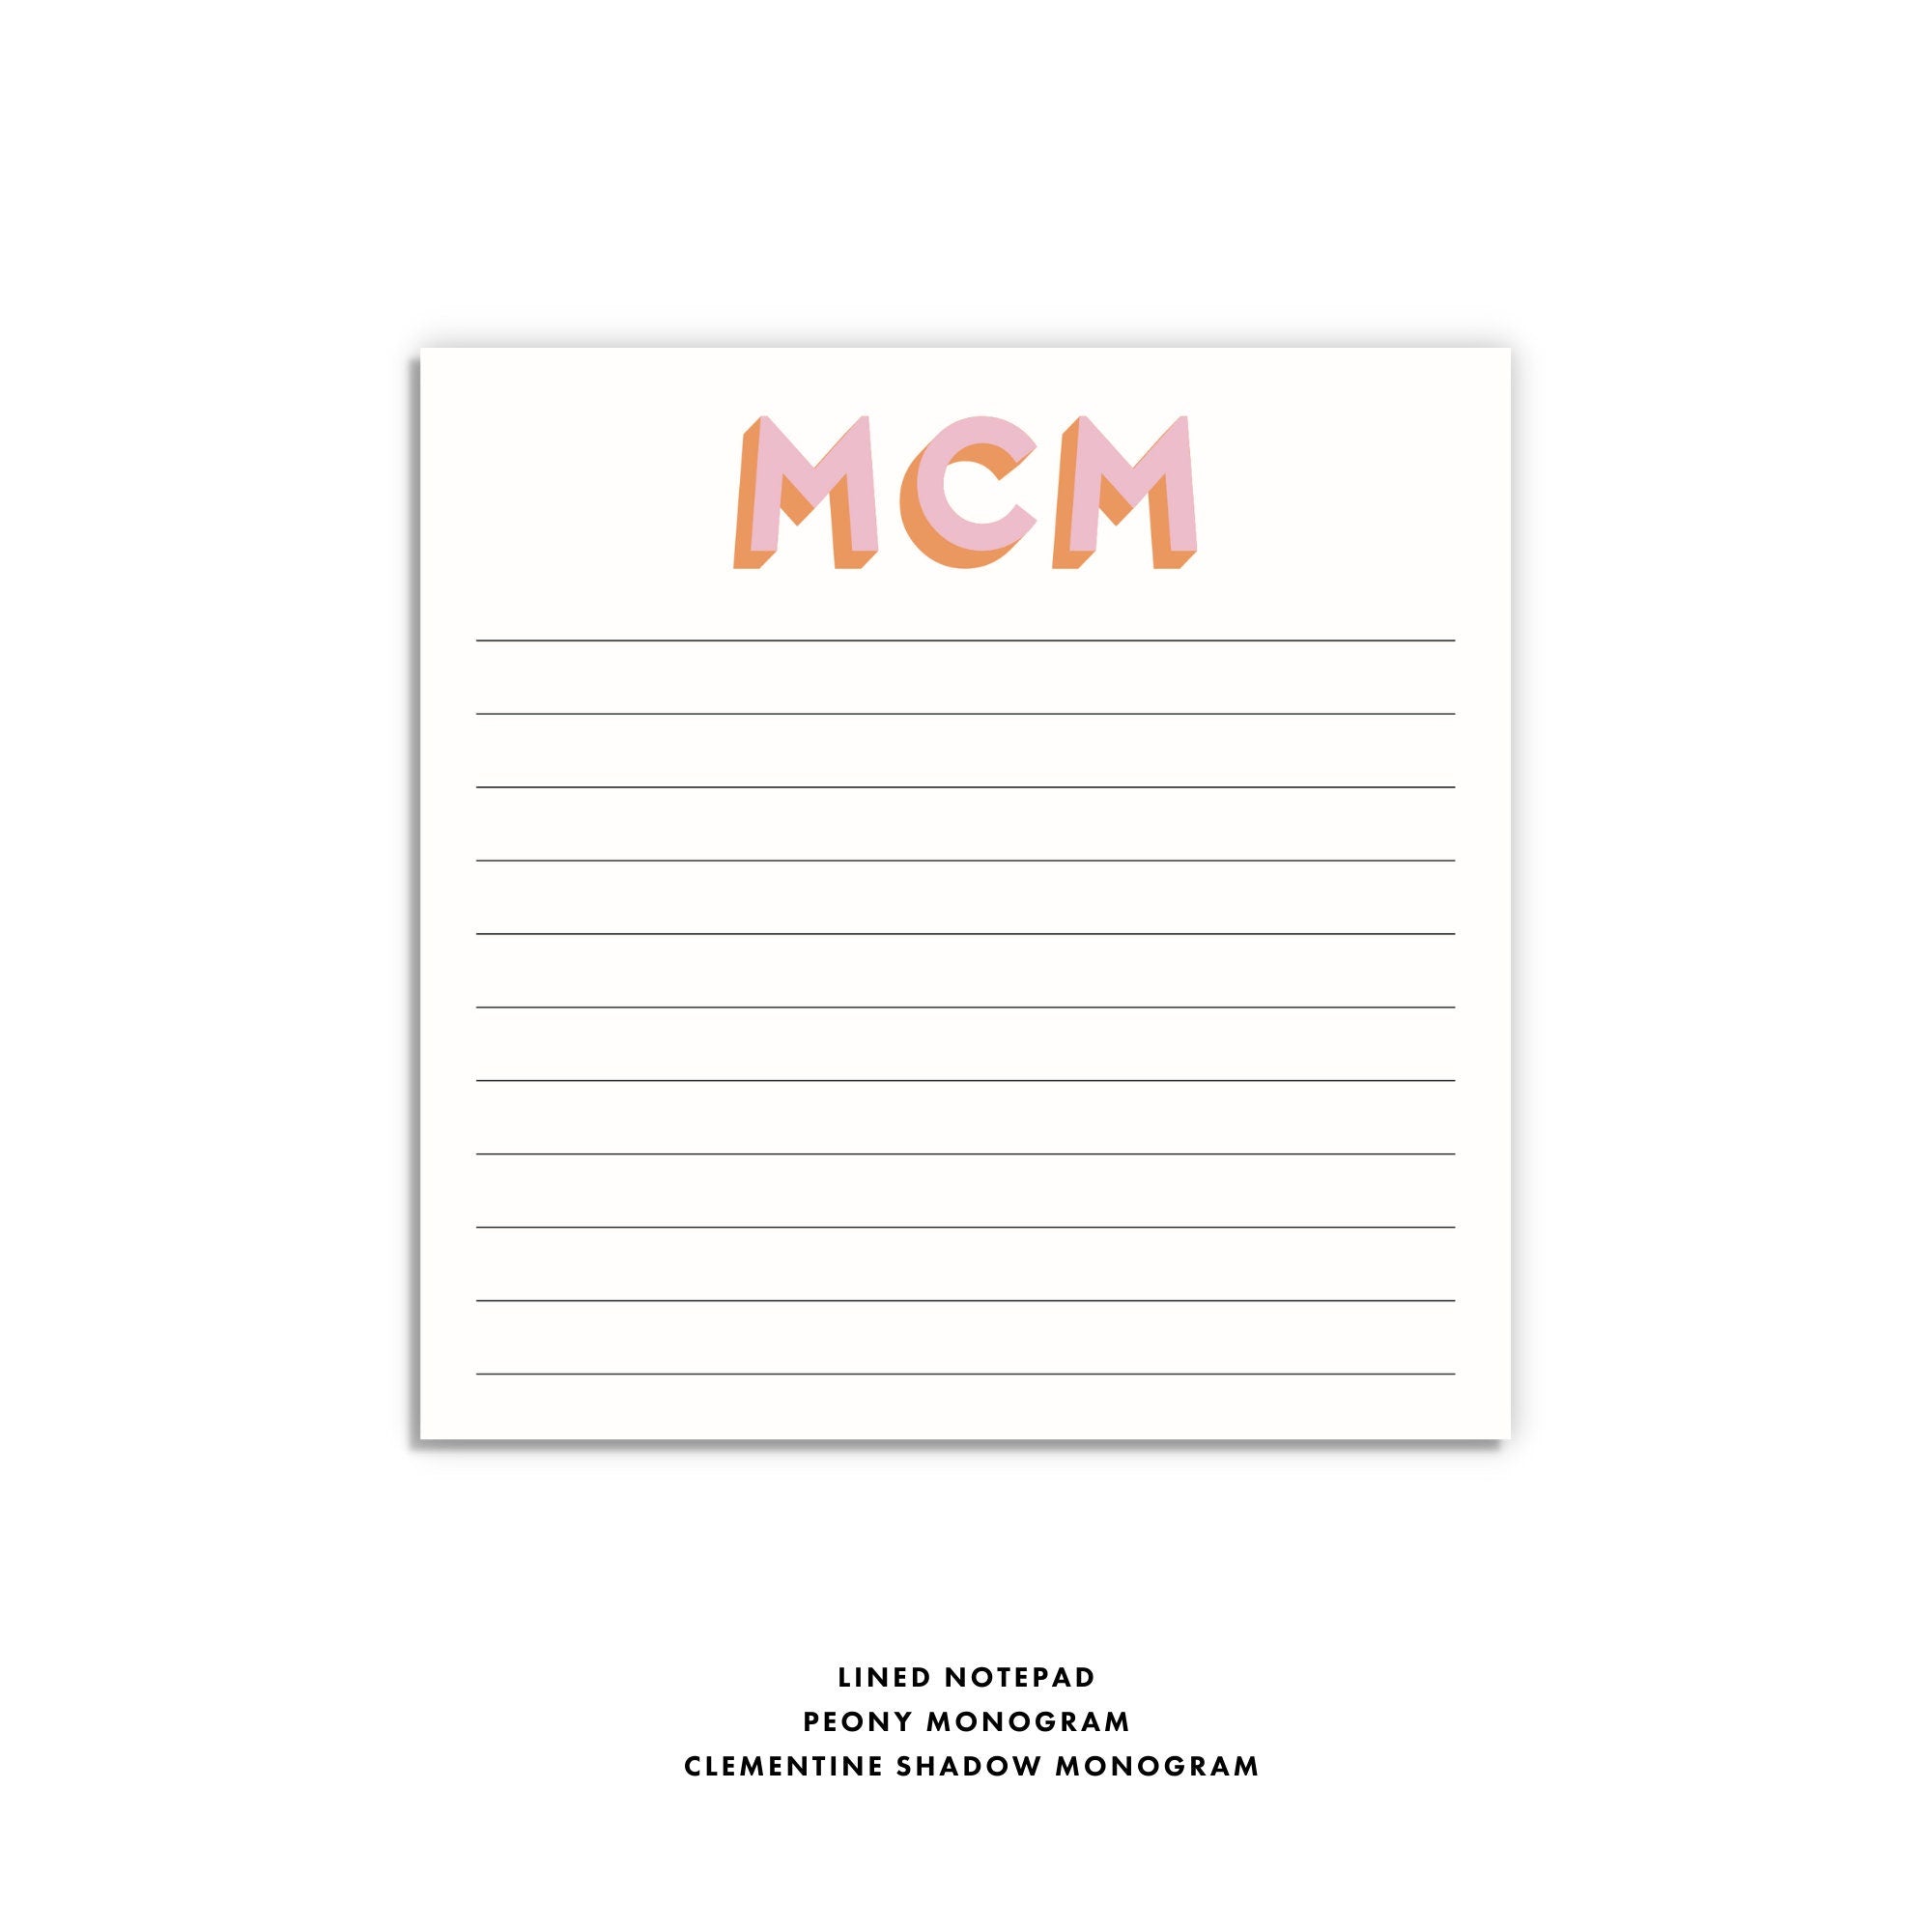 personalized notepad, lined notepad, monogram stationary / stationary, teacher gift, to do list, grad gift, colorful stationery